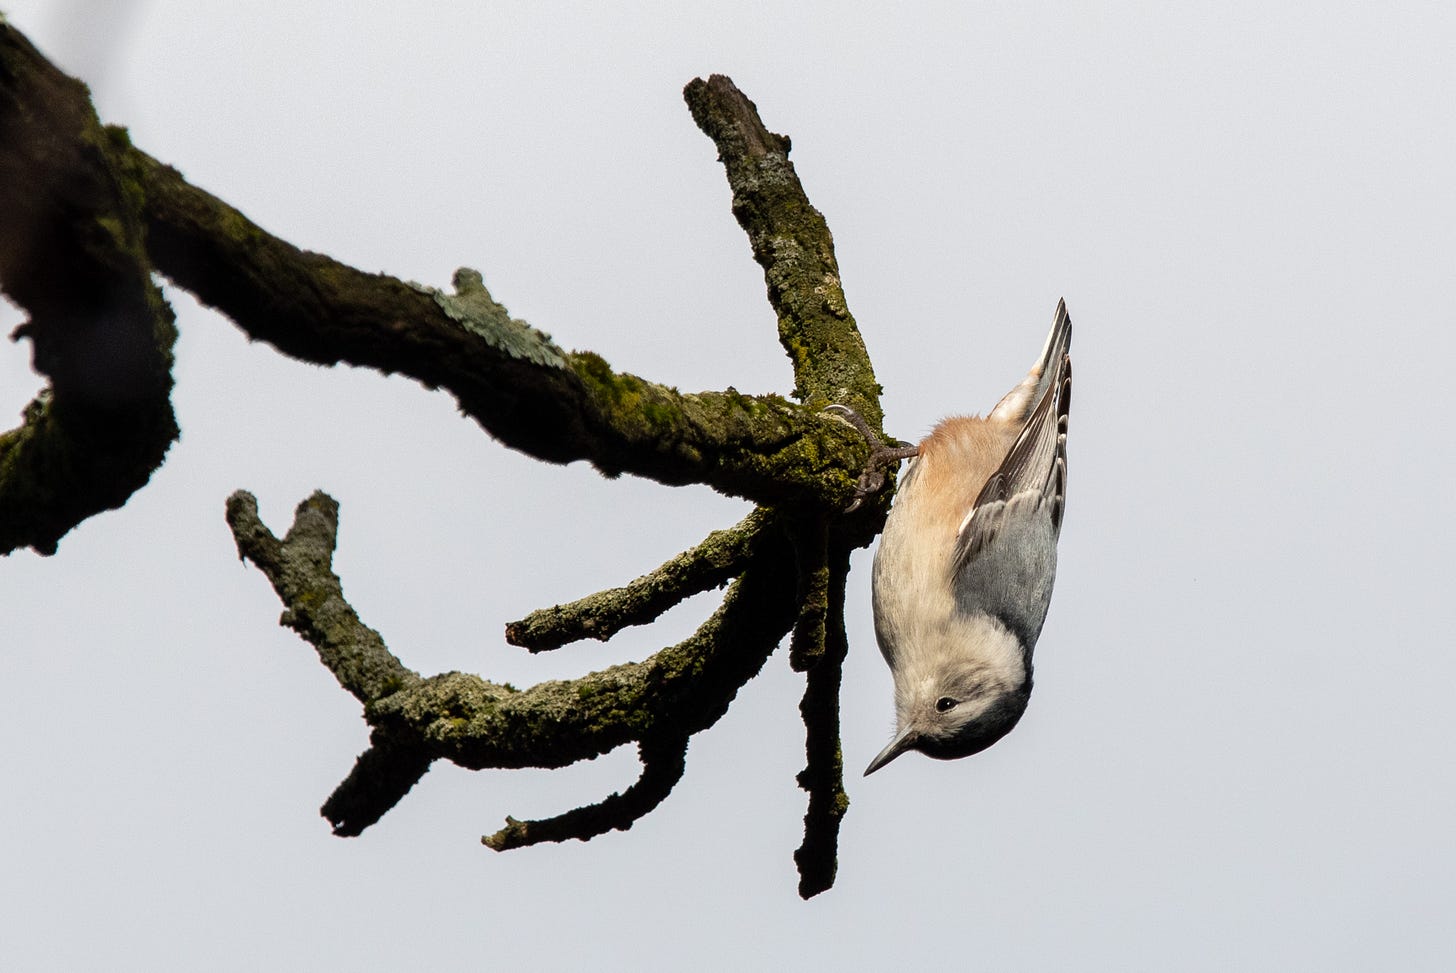 A white-breasted nuthatch upside-down at the end of a branch